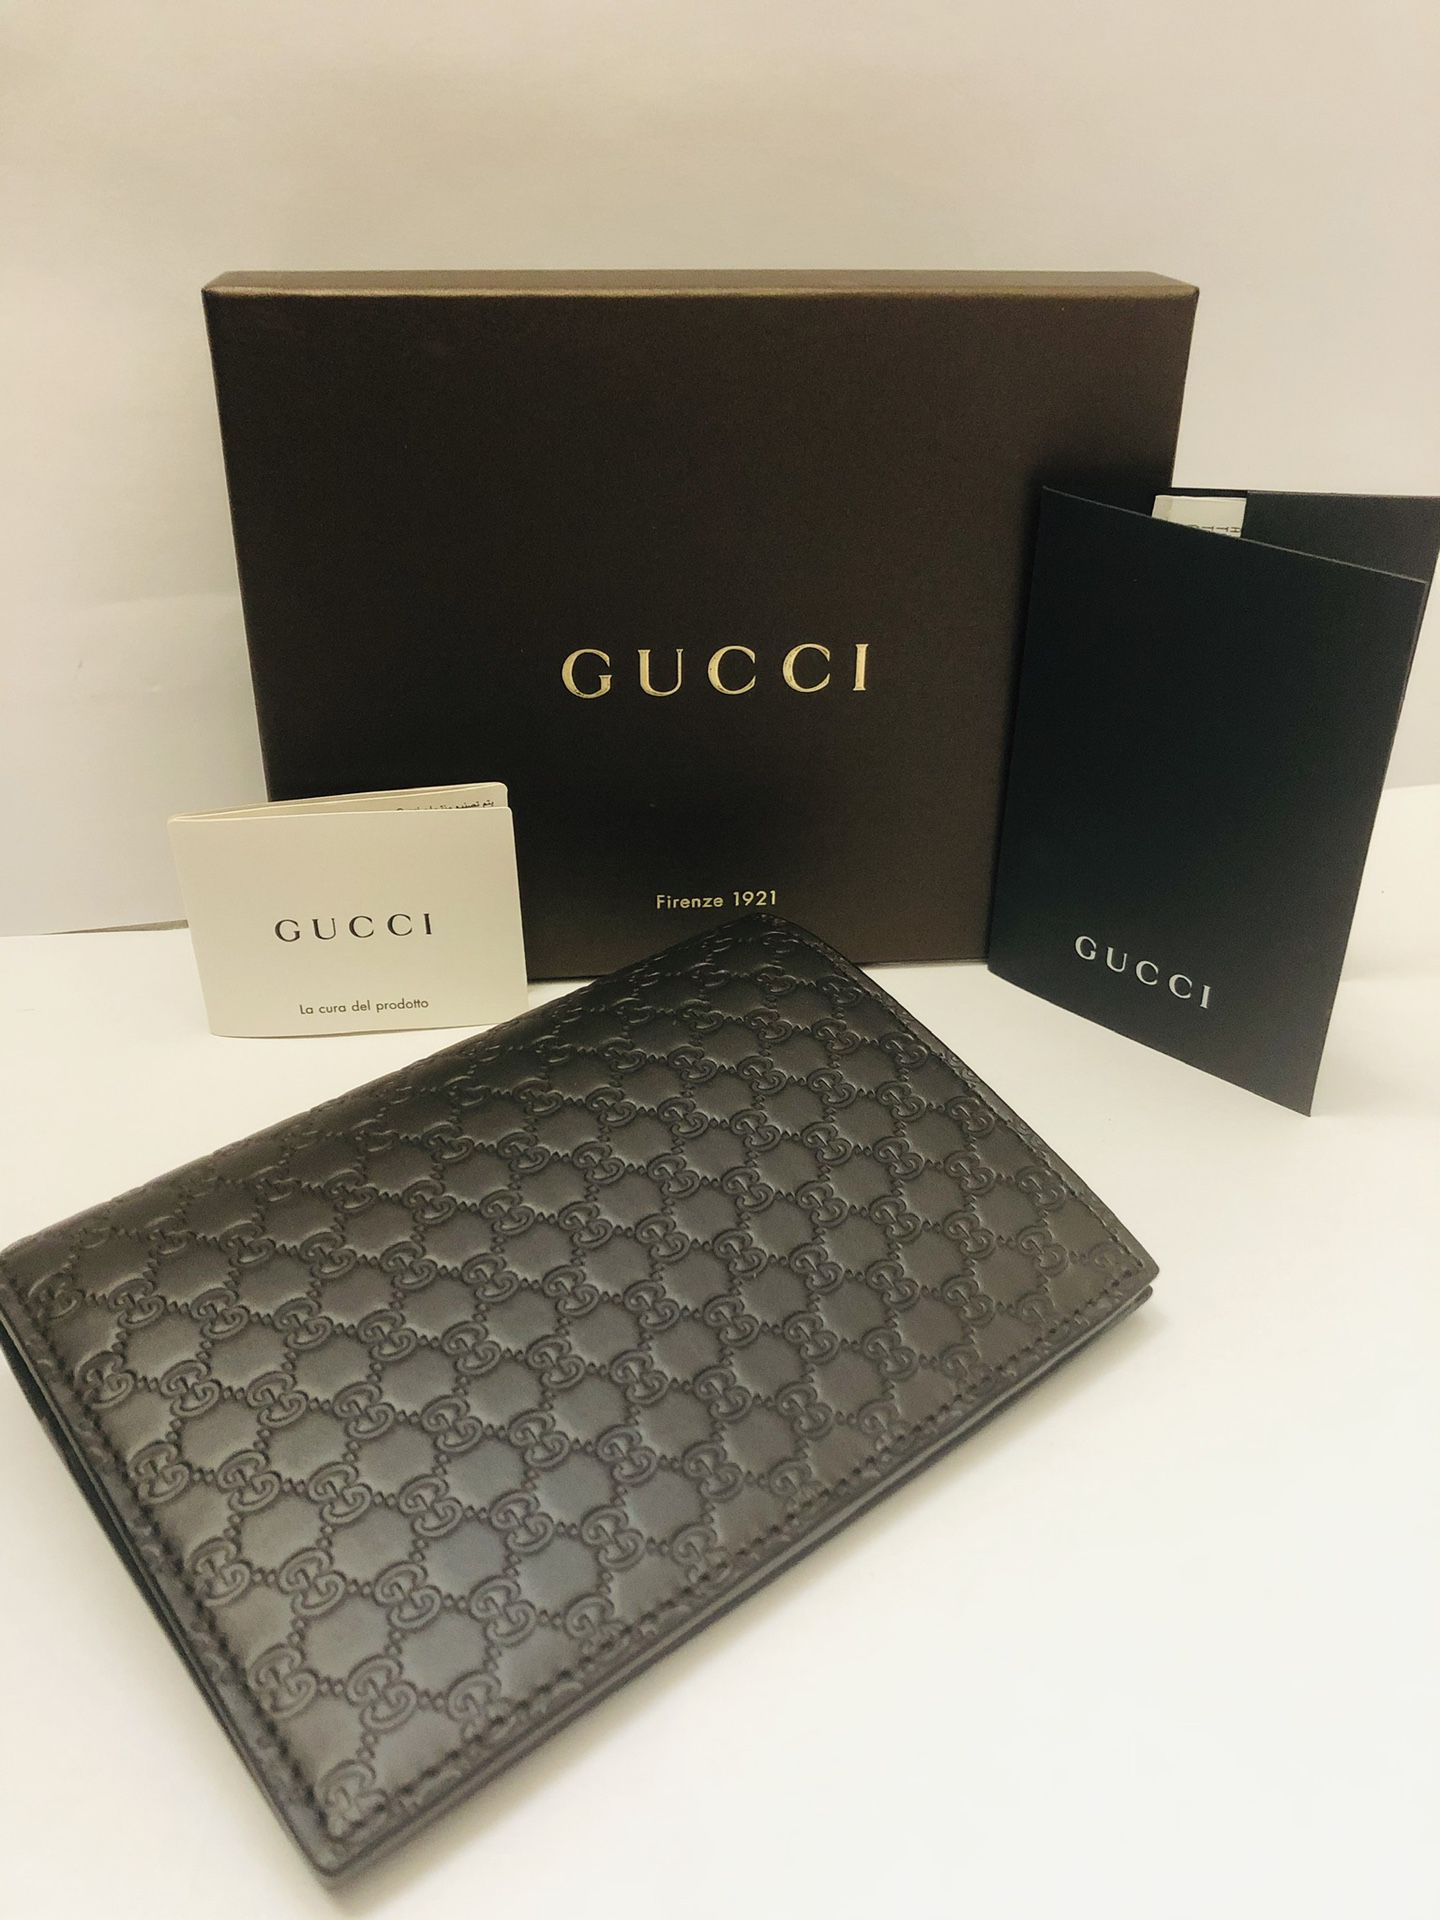 GUCCI MICROGUCCISSIMA Brown Leather Passport Holder Wallet AUTHENTIC ($590)